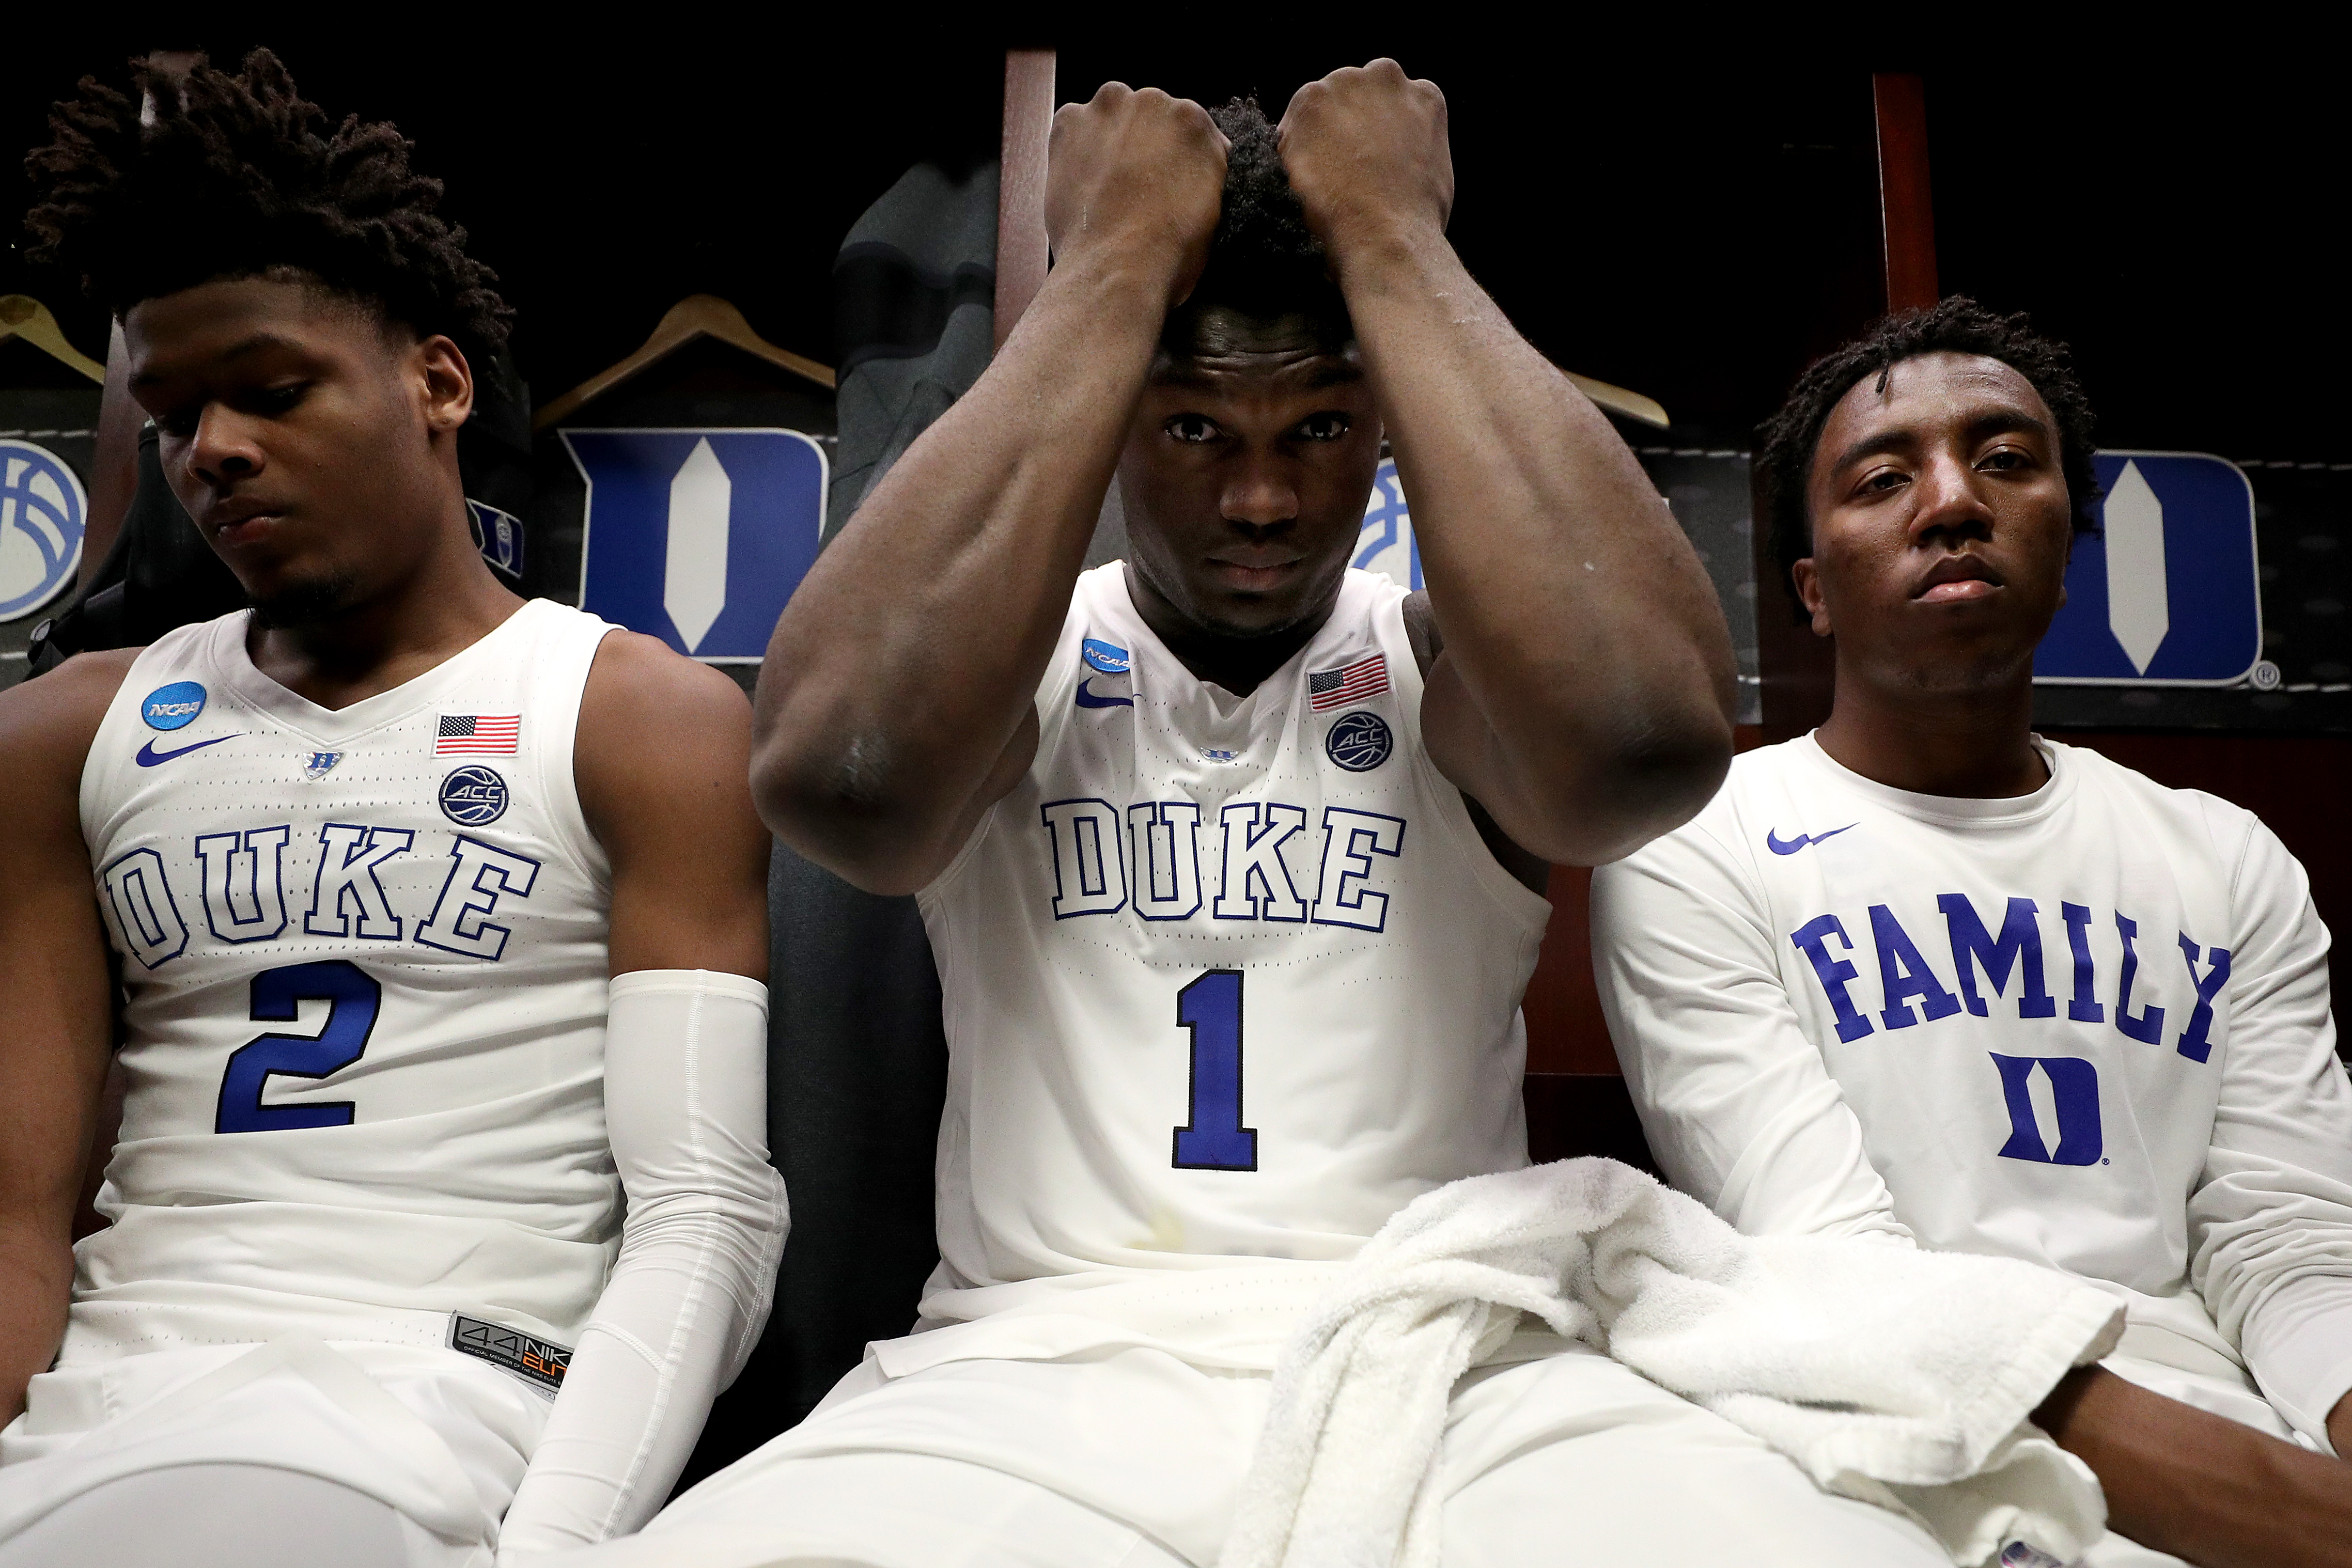 Zion Williamson's defense is a problem and raises questions about